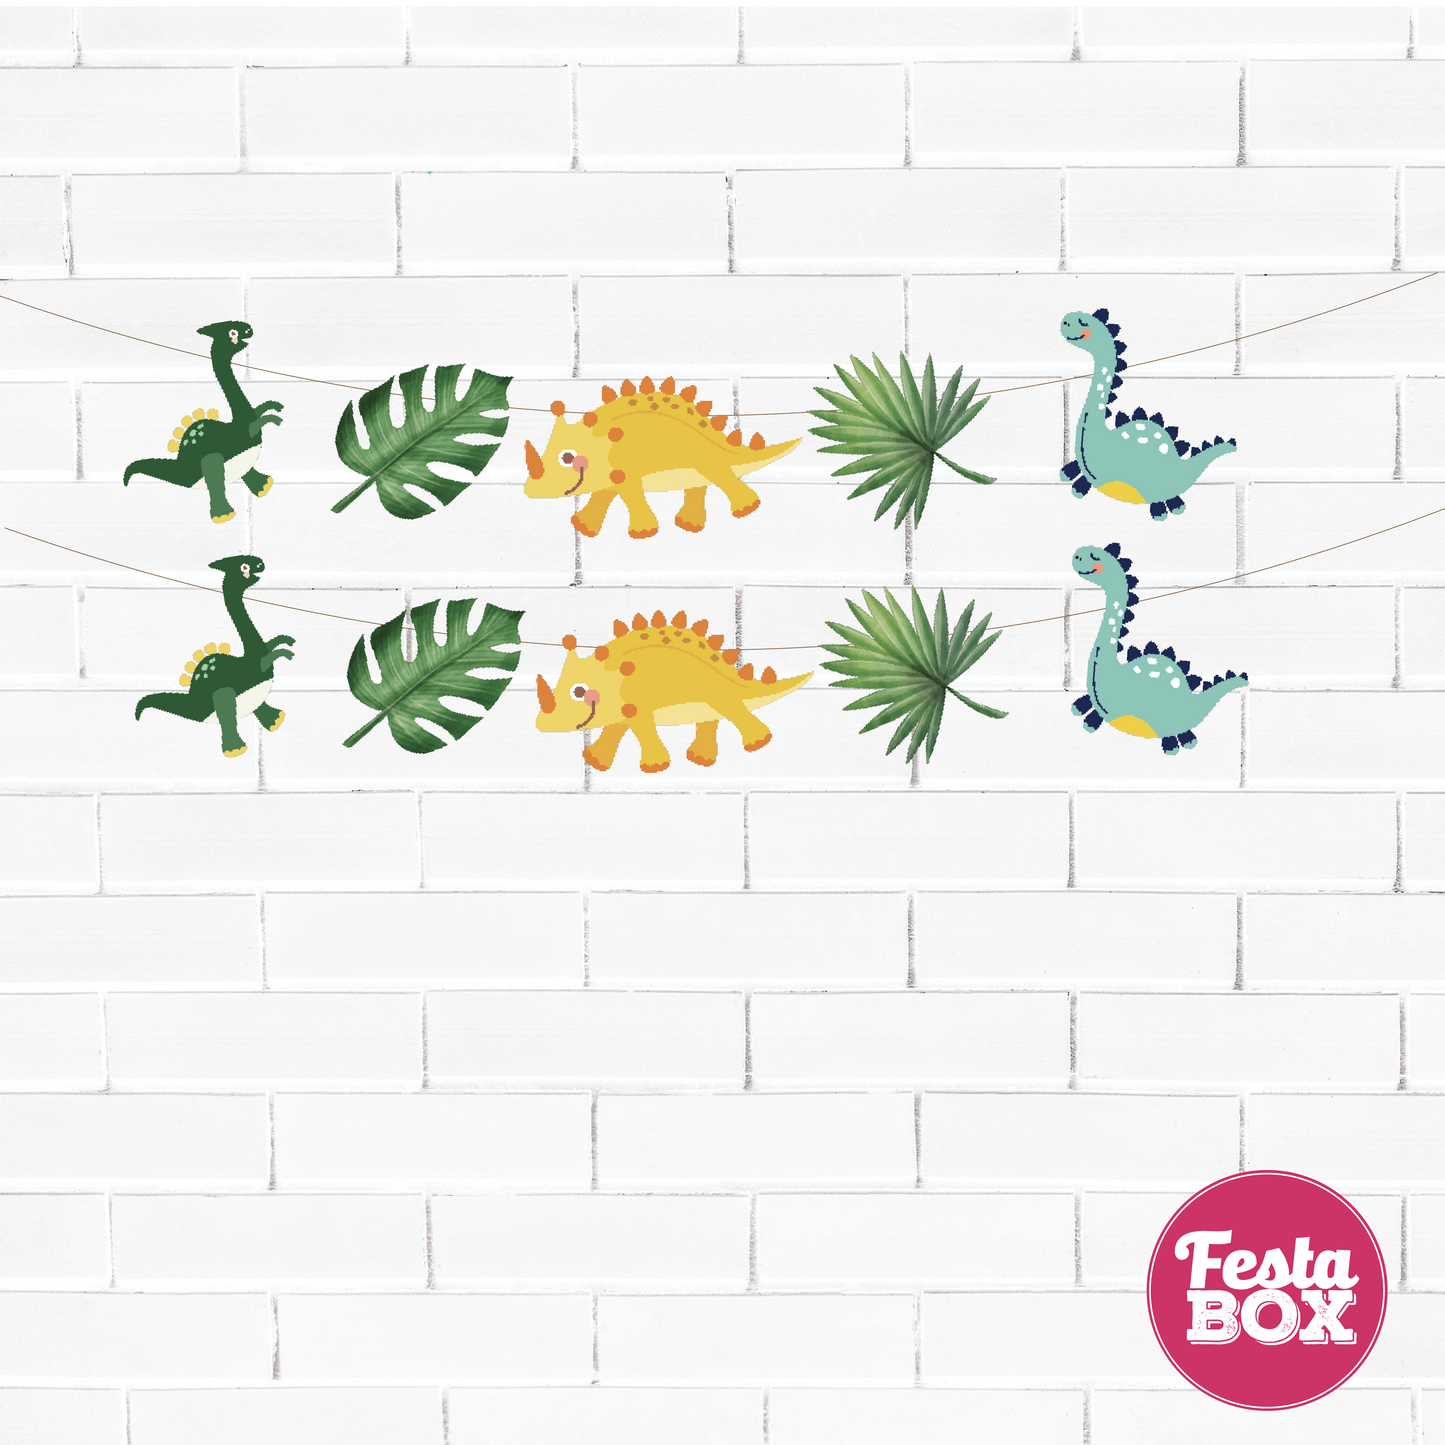 Background Banner for Birthday Party Decoration - Dinosaur Theme Option 2